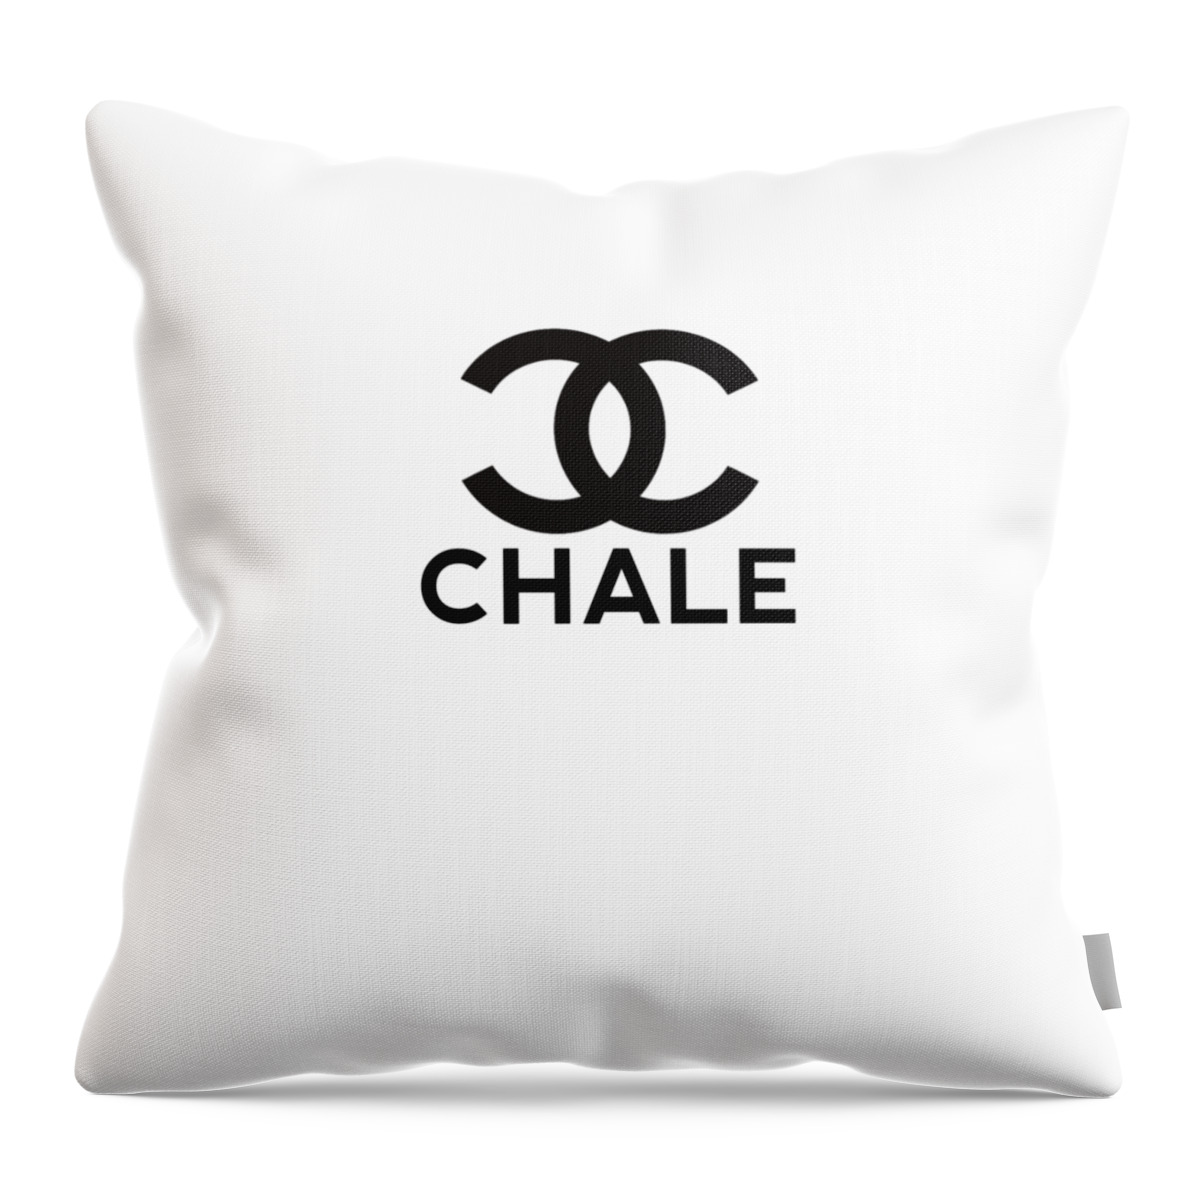 Chale Throw Pillow by Abina Johnson - Pixels